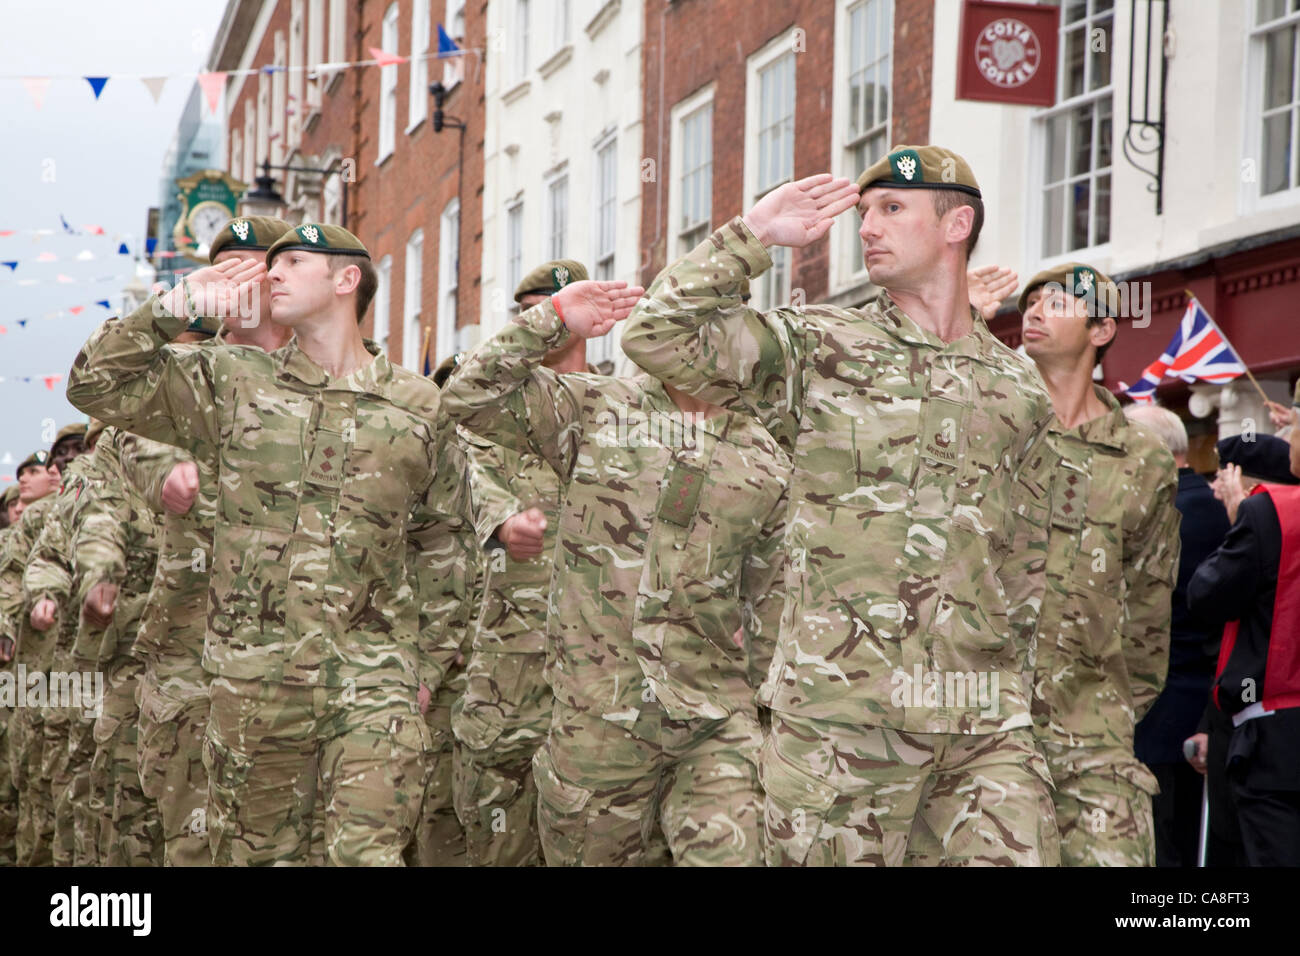 Worcester, England, UK. Wednesday 27th June 2012.  Soldiers from 2nd Battalion Mercian Regiment, Grenadier Guards, Queen's Royal Hussars and members of the Royal British legion, parade through the streets of Worcester. Seven soldiers from the city were also given their service medals. Stock Photo